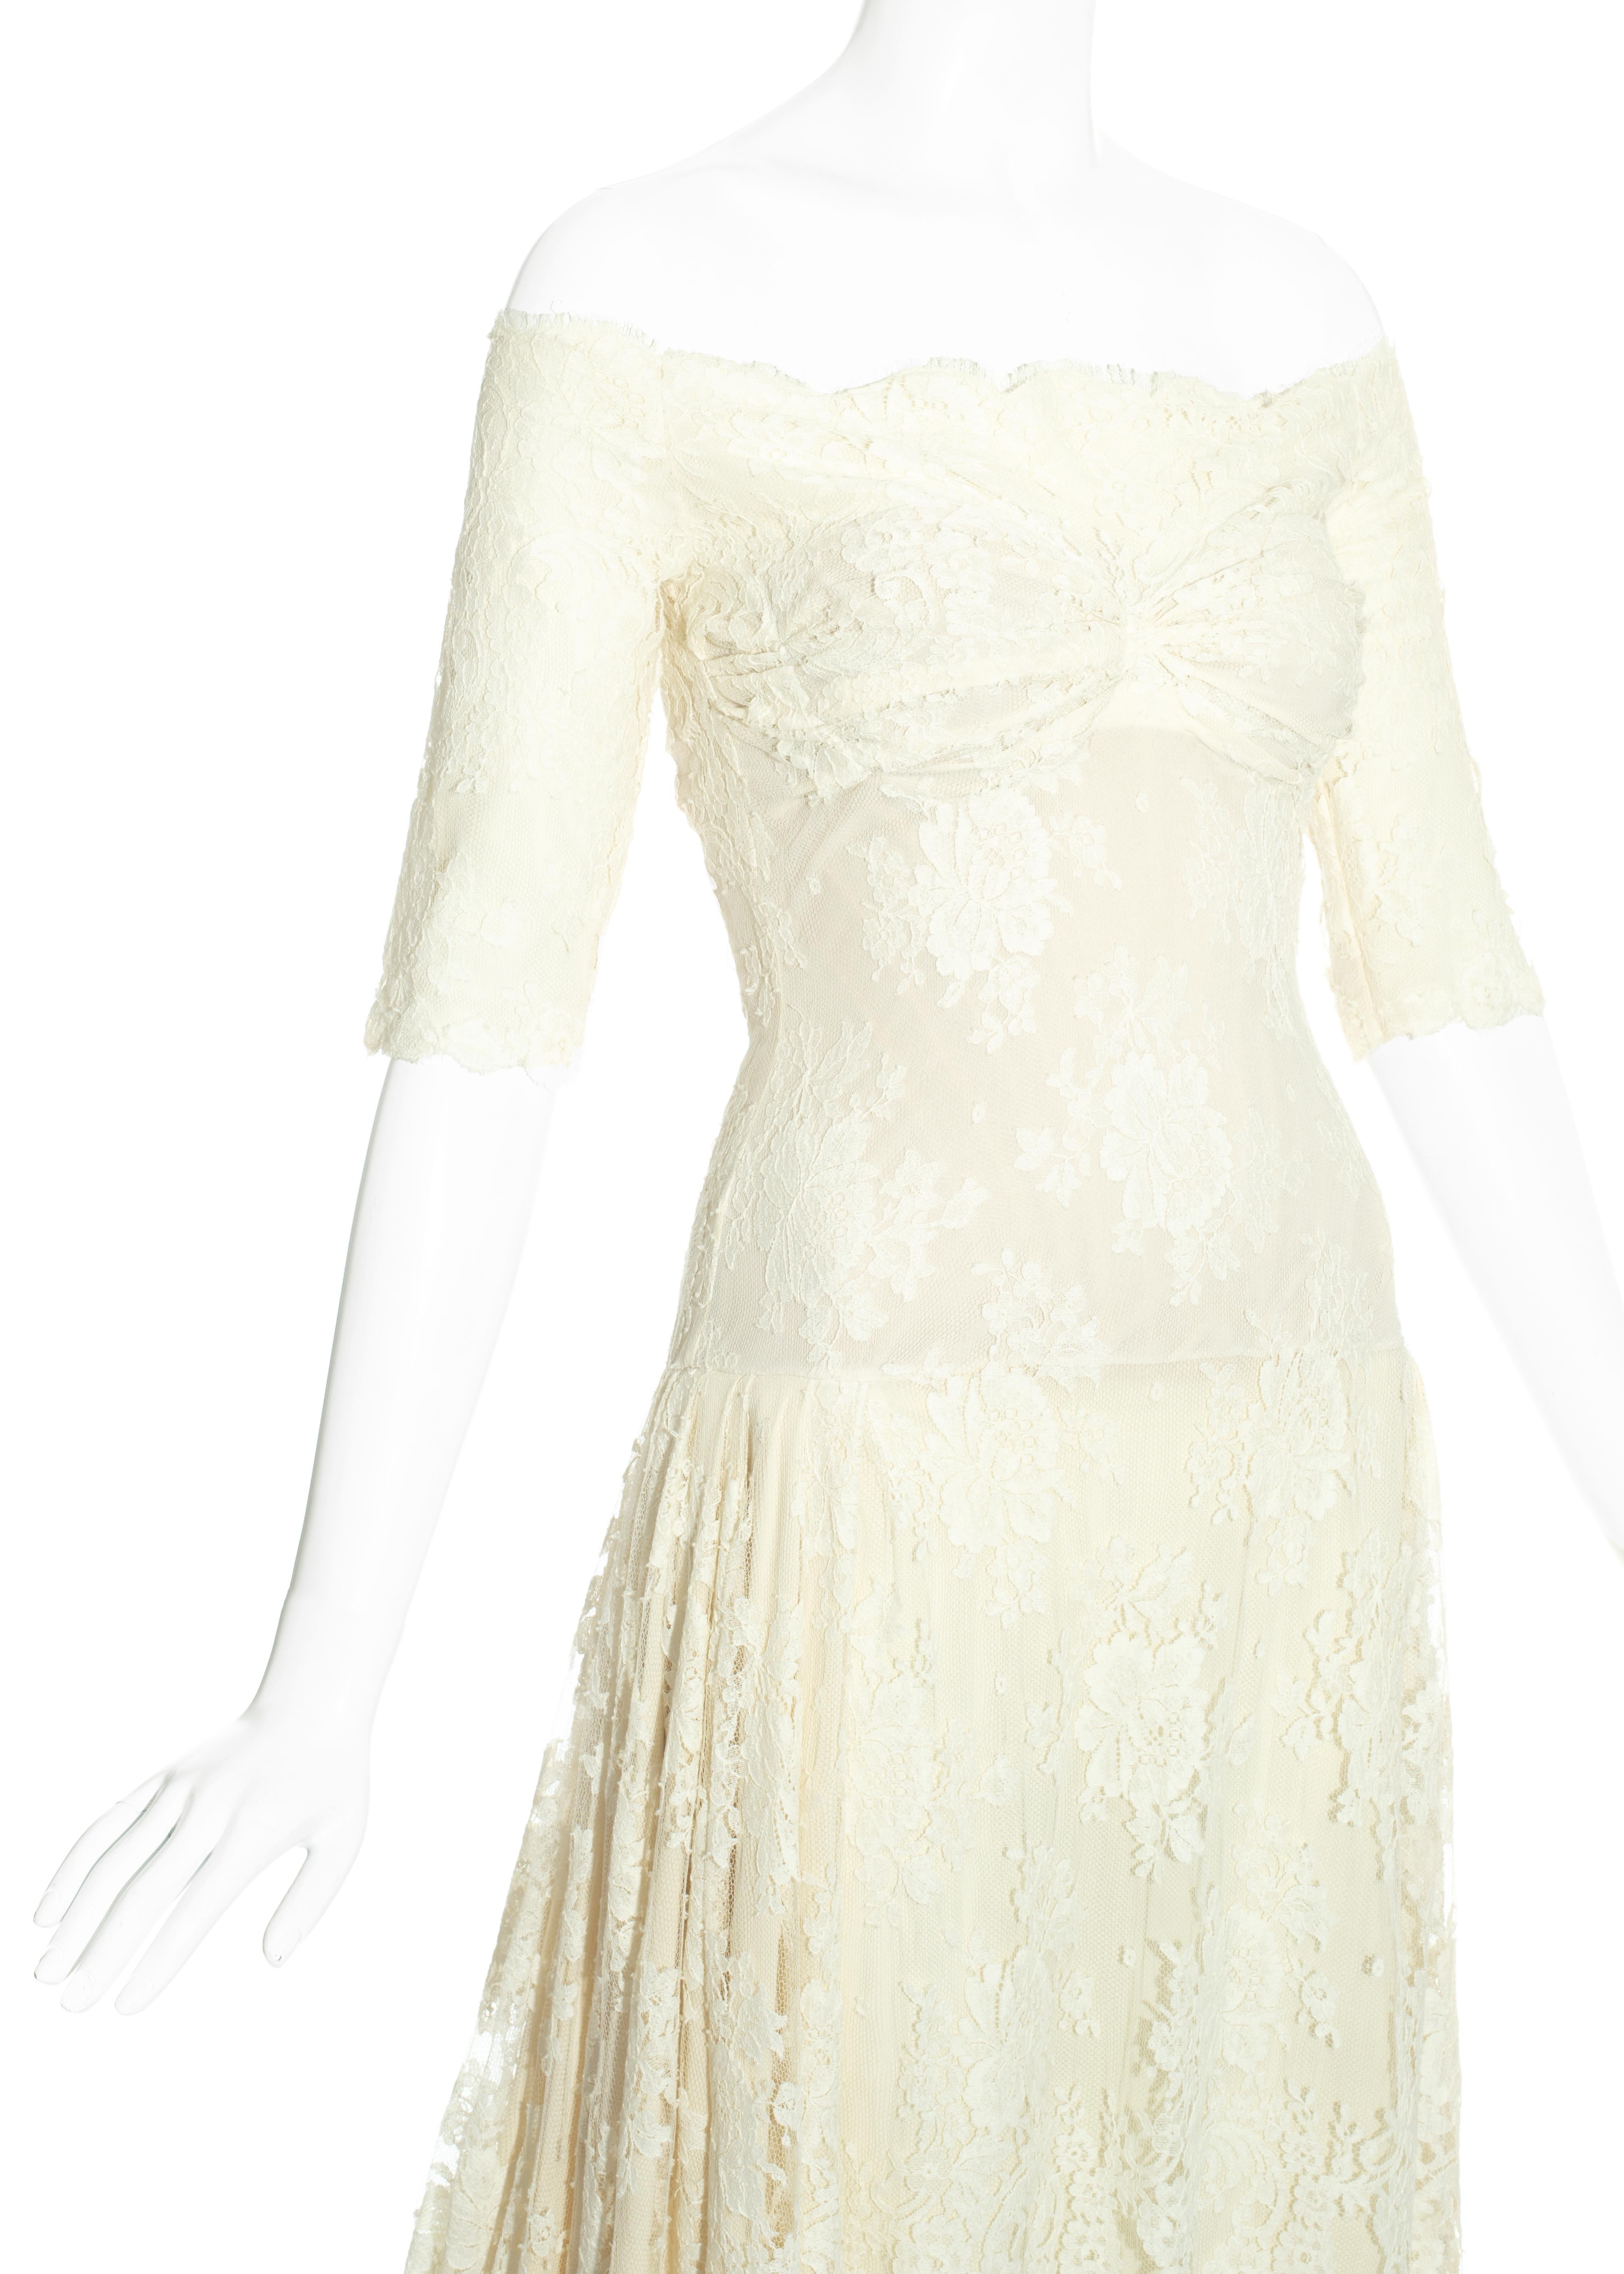 Beige Alexander McQueen ivory lace corseted trained evening dress, 'Sarabande' ss 2007